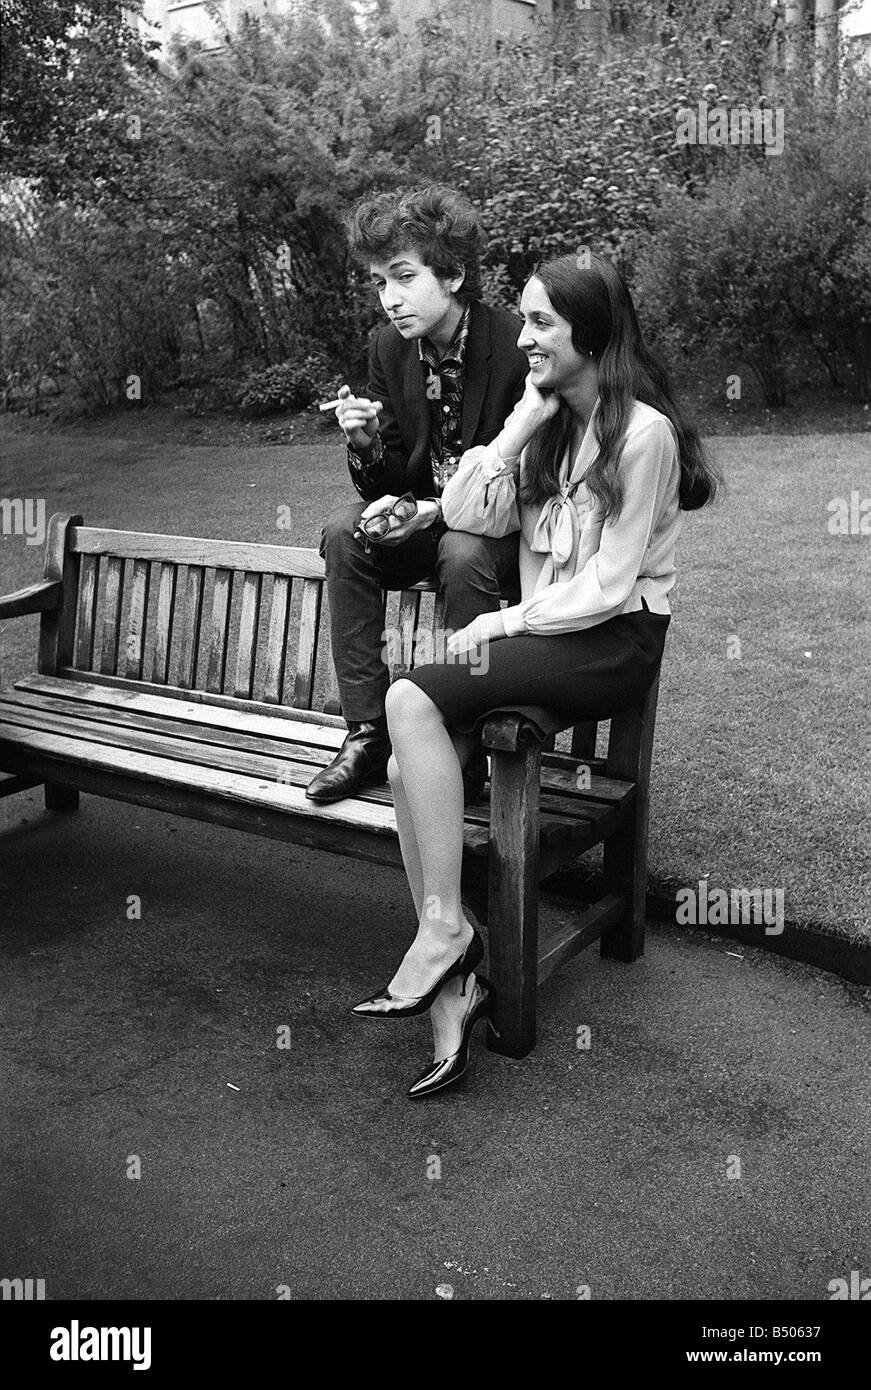 Bob Dylan and Joan Baez in the Savoy Gardens April 1965 on the Thames embankment Swinging Sixties Stock Photo